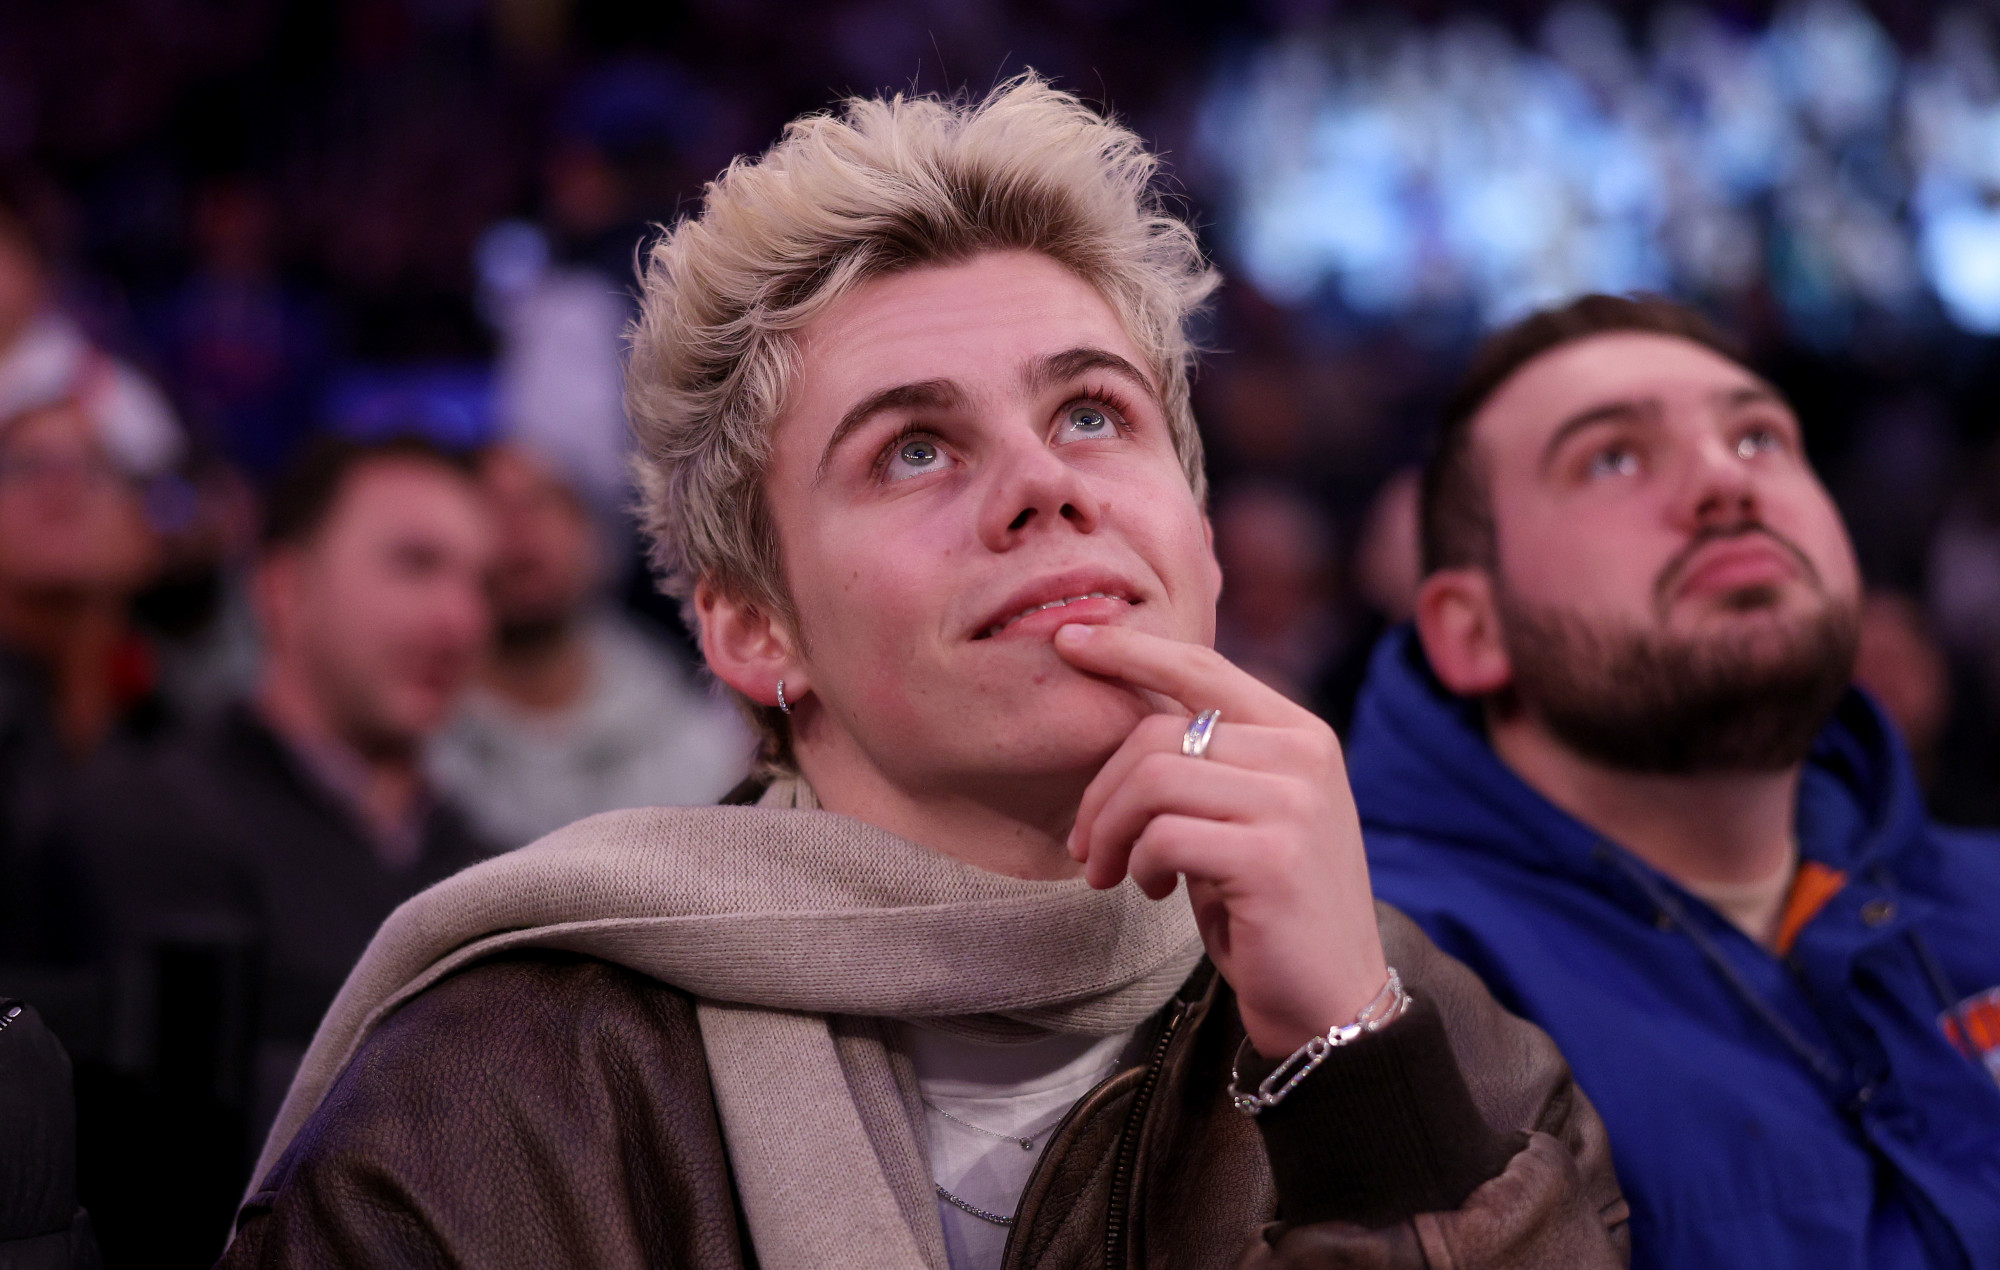 The Kid Laroi at Madison Square Garden watching a NBA game. Photo credit: Elsa/Getty Images